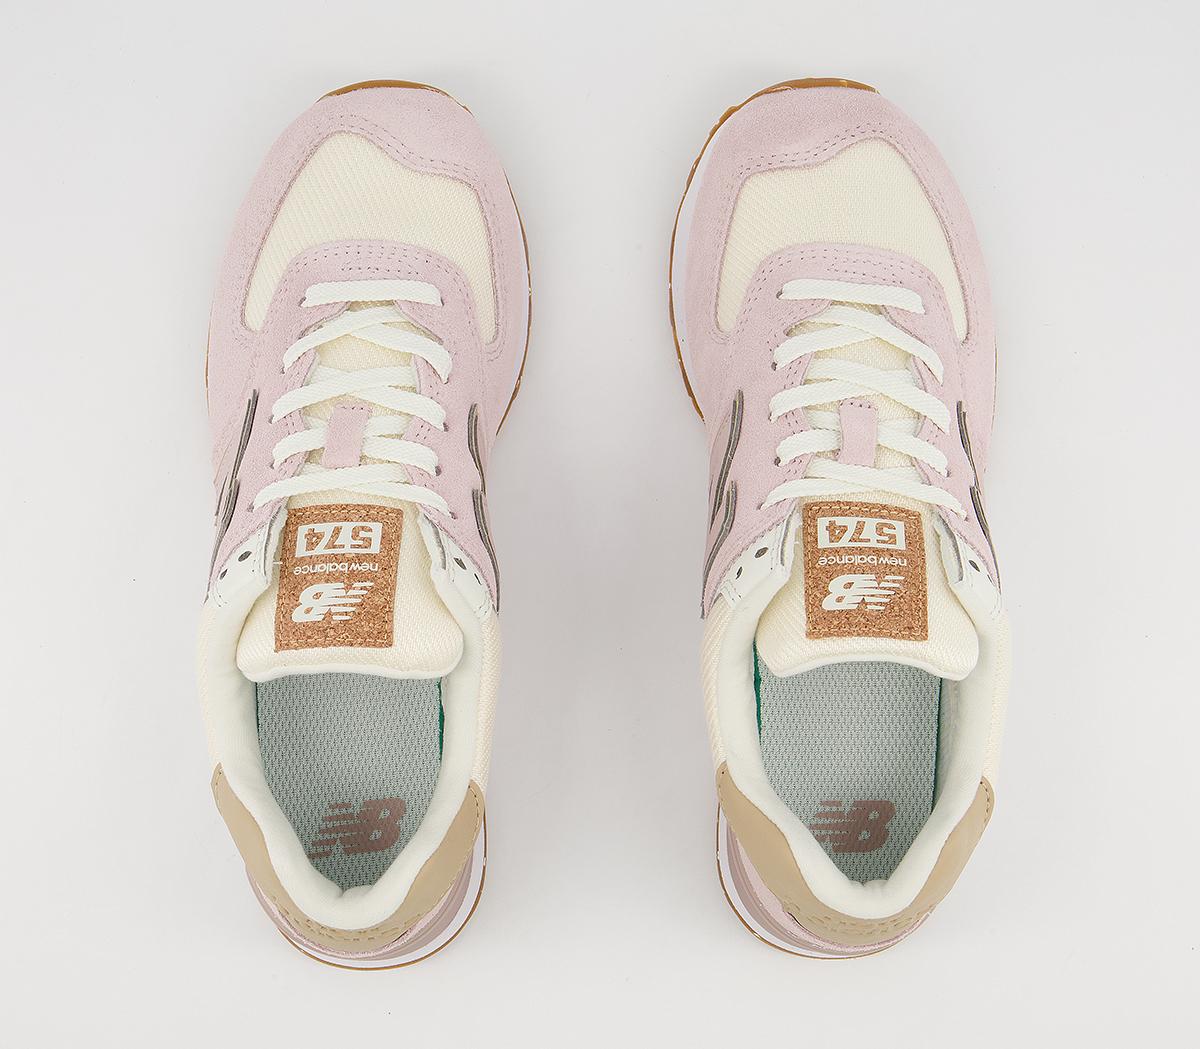 New Balance 574 Trainers Space Pink - Pastel Trainers & Shoes